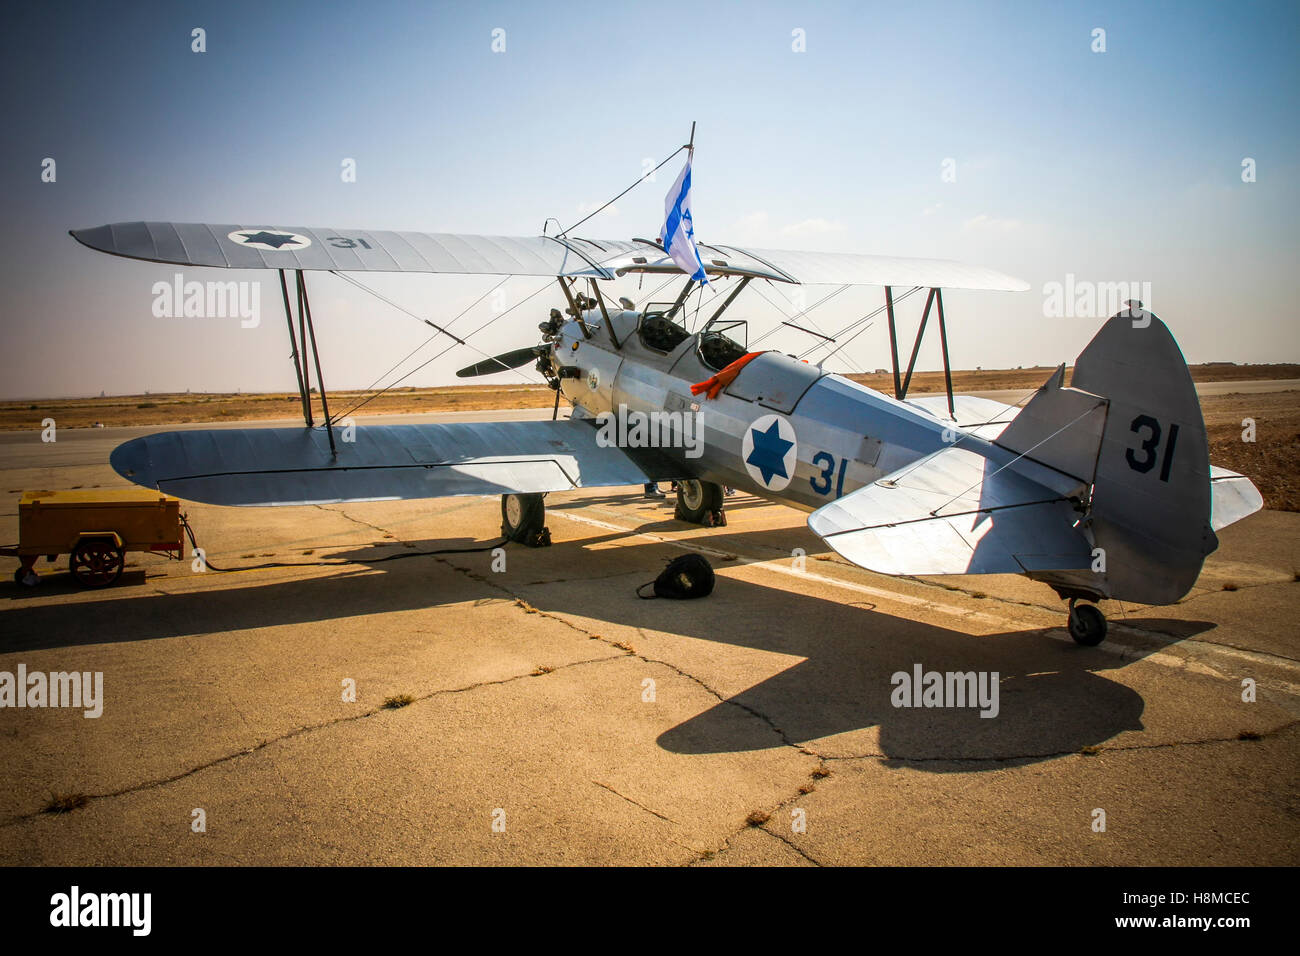 Israeli Air Force Stearman (Boeing) Model 75 PT-17 biplane, of which at least 9,783 were built in the United States during the 1 Stock Photo